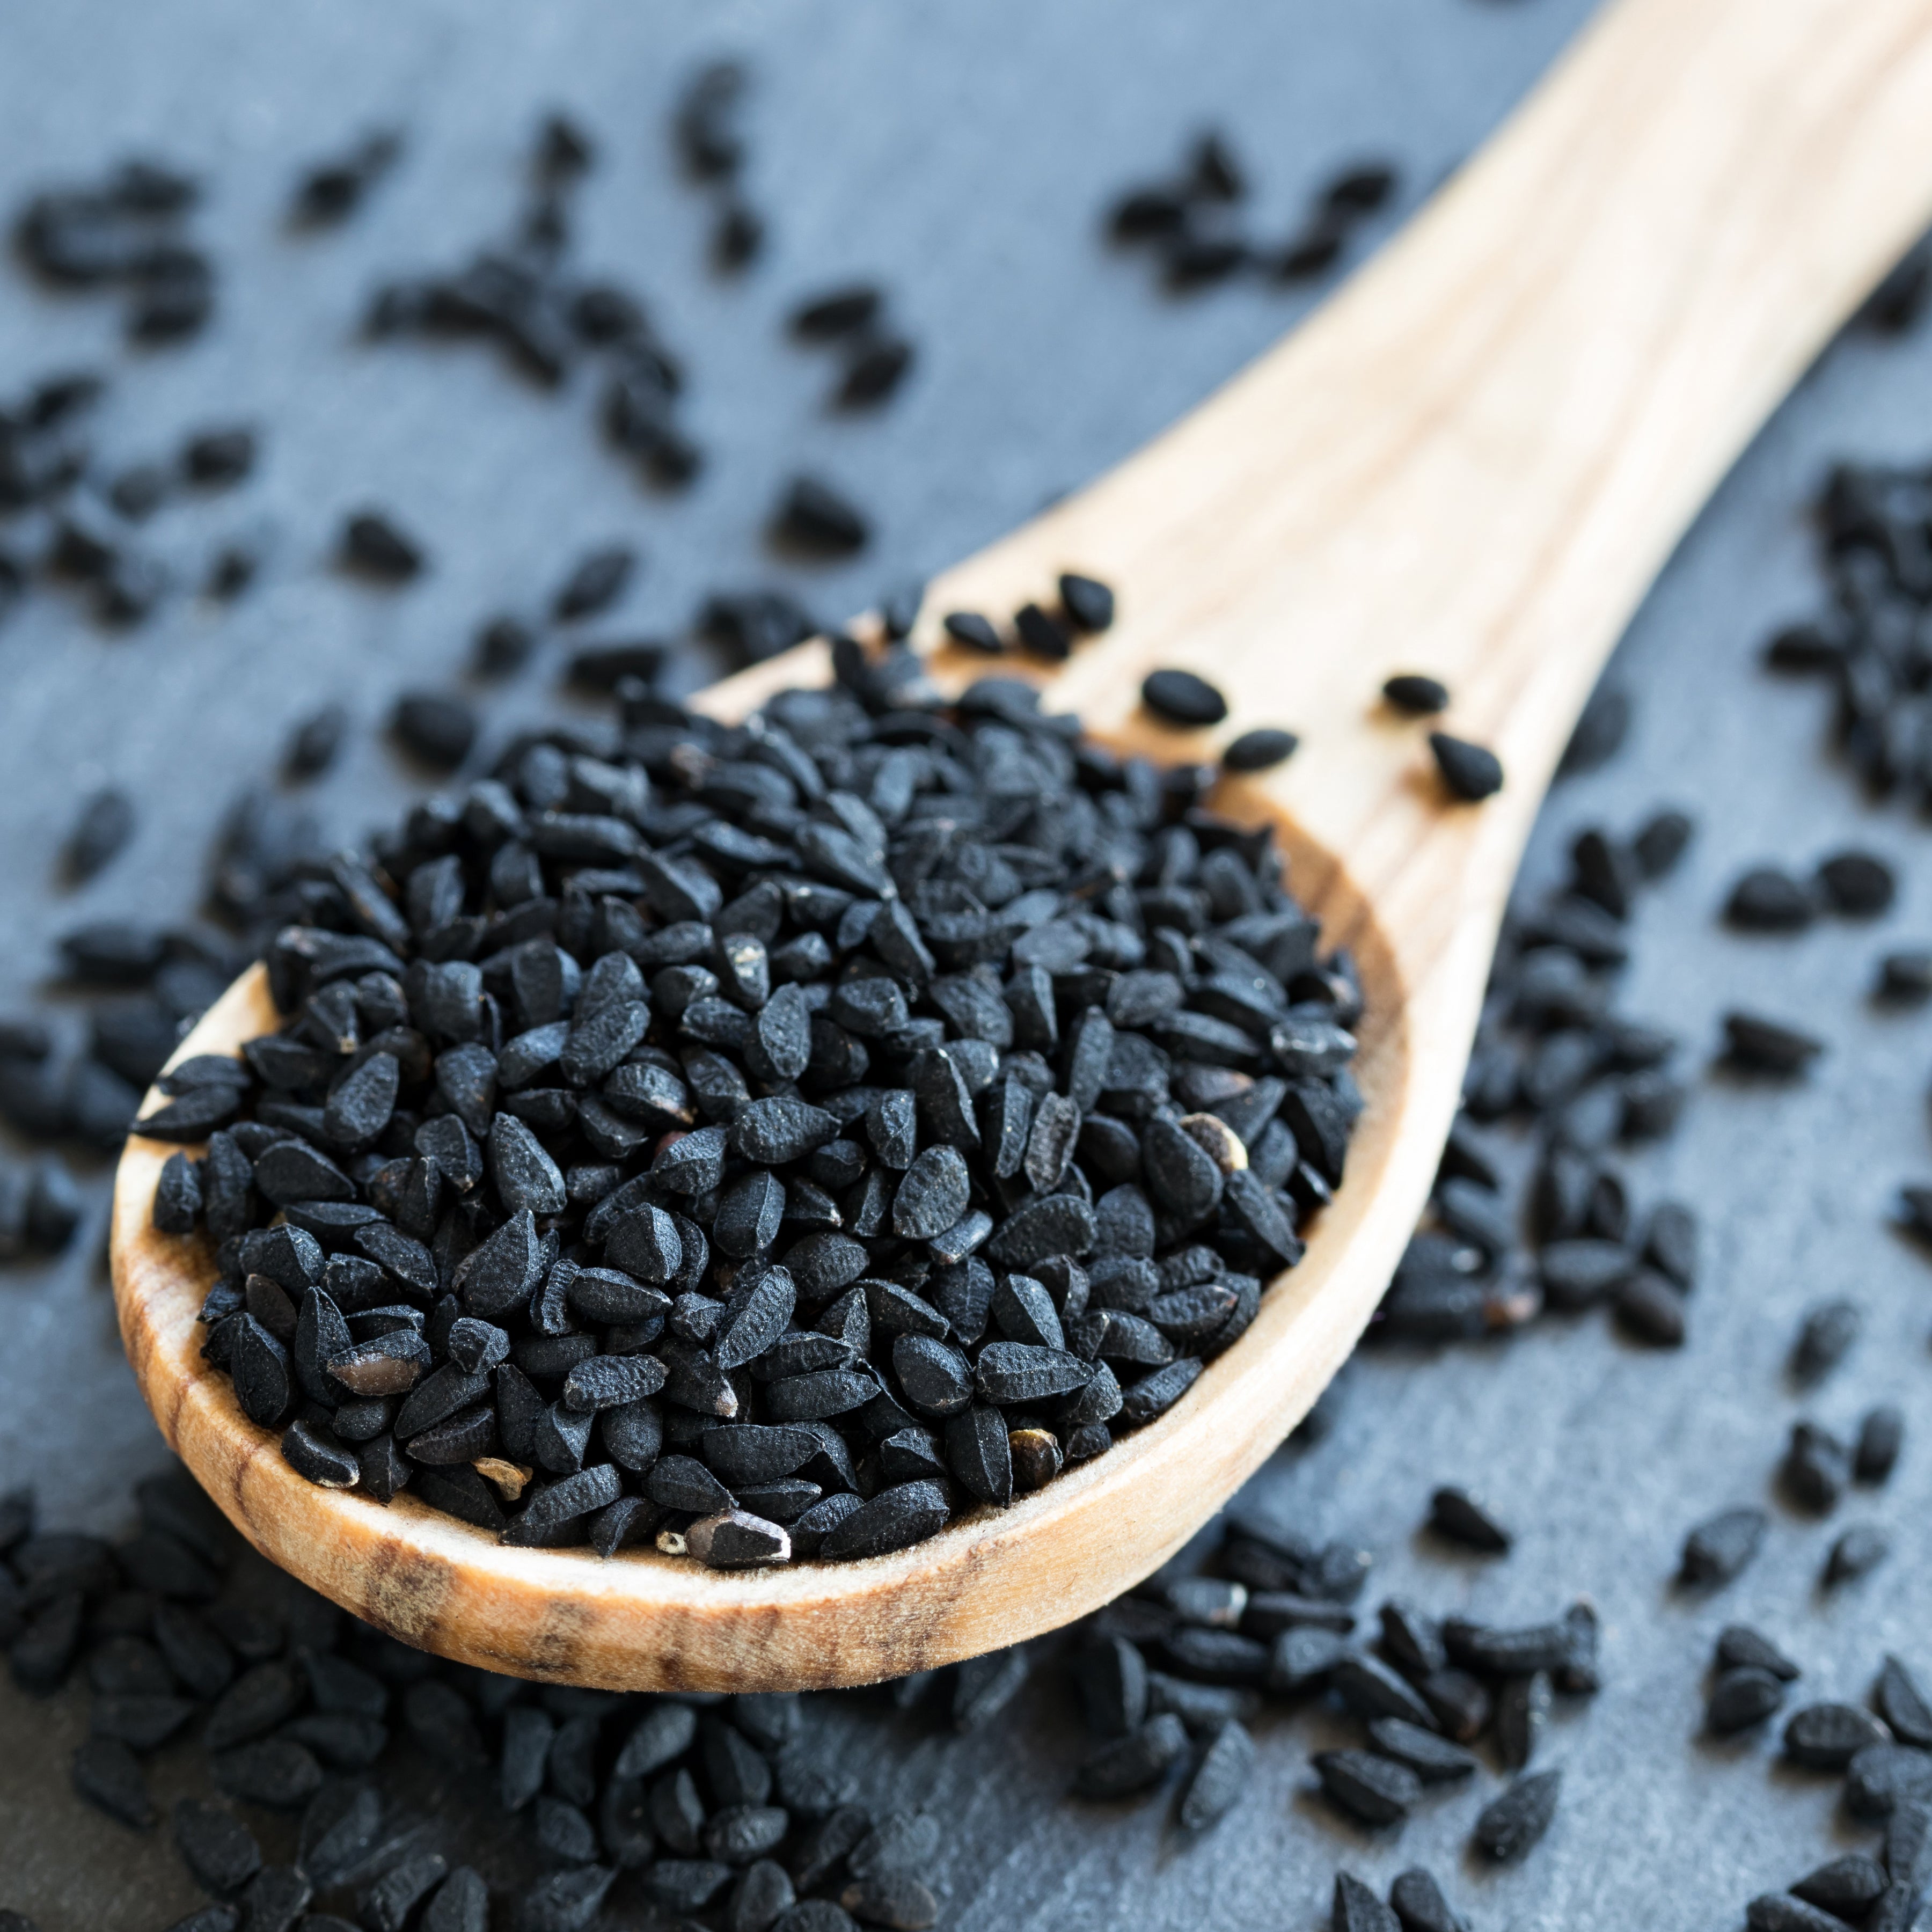 How To Use Black Seed Oil Kalonji For Hair Growth And Baldness